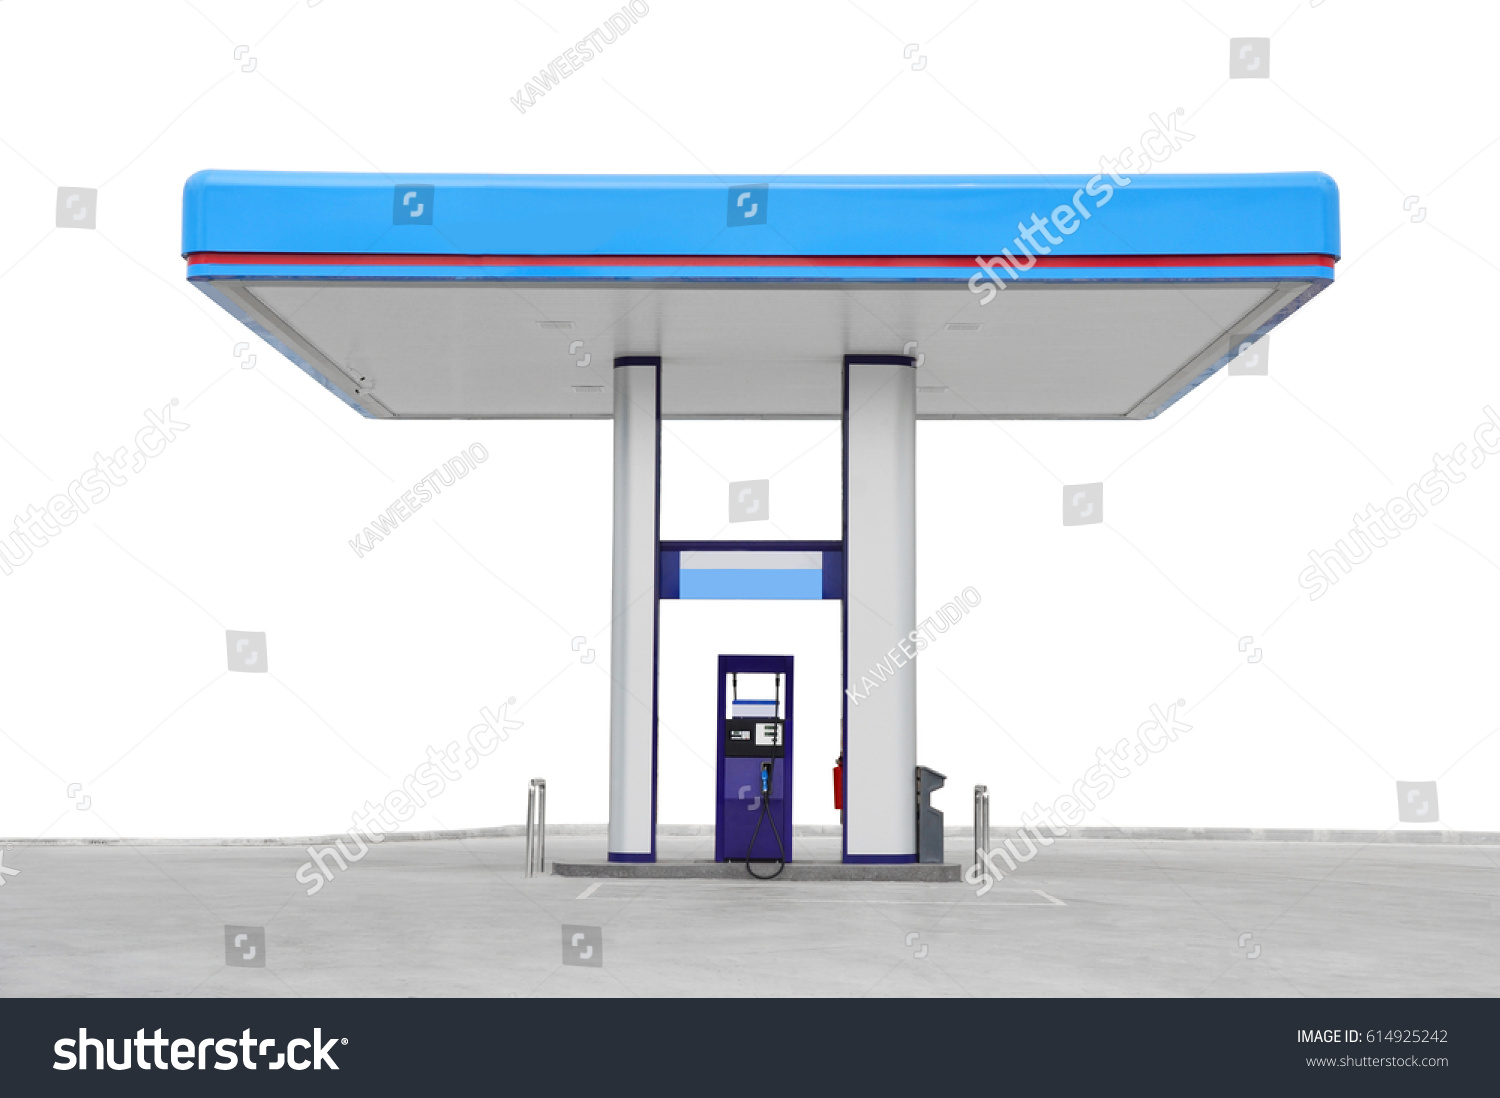  gas station. Oil fuel gasoline service station. isolated on white background #614925242